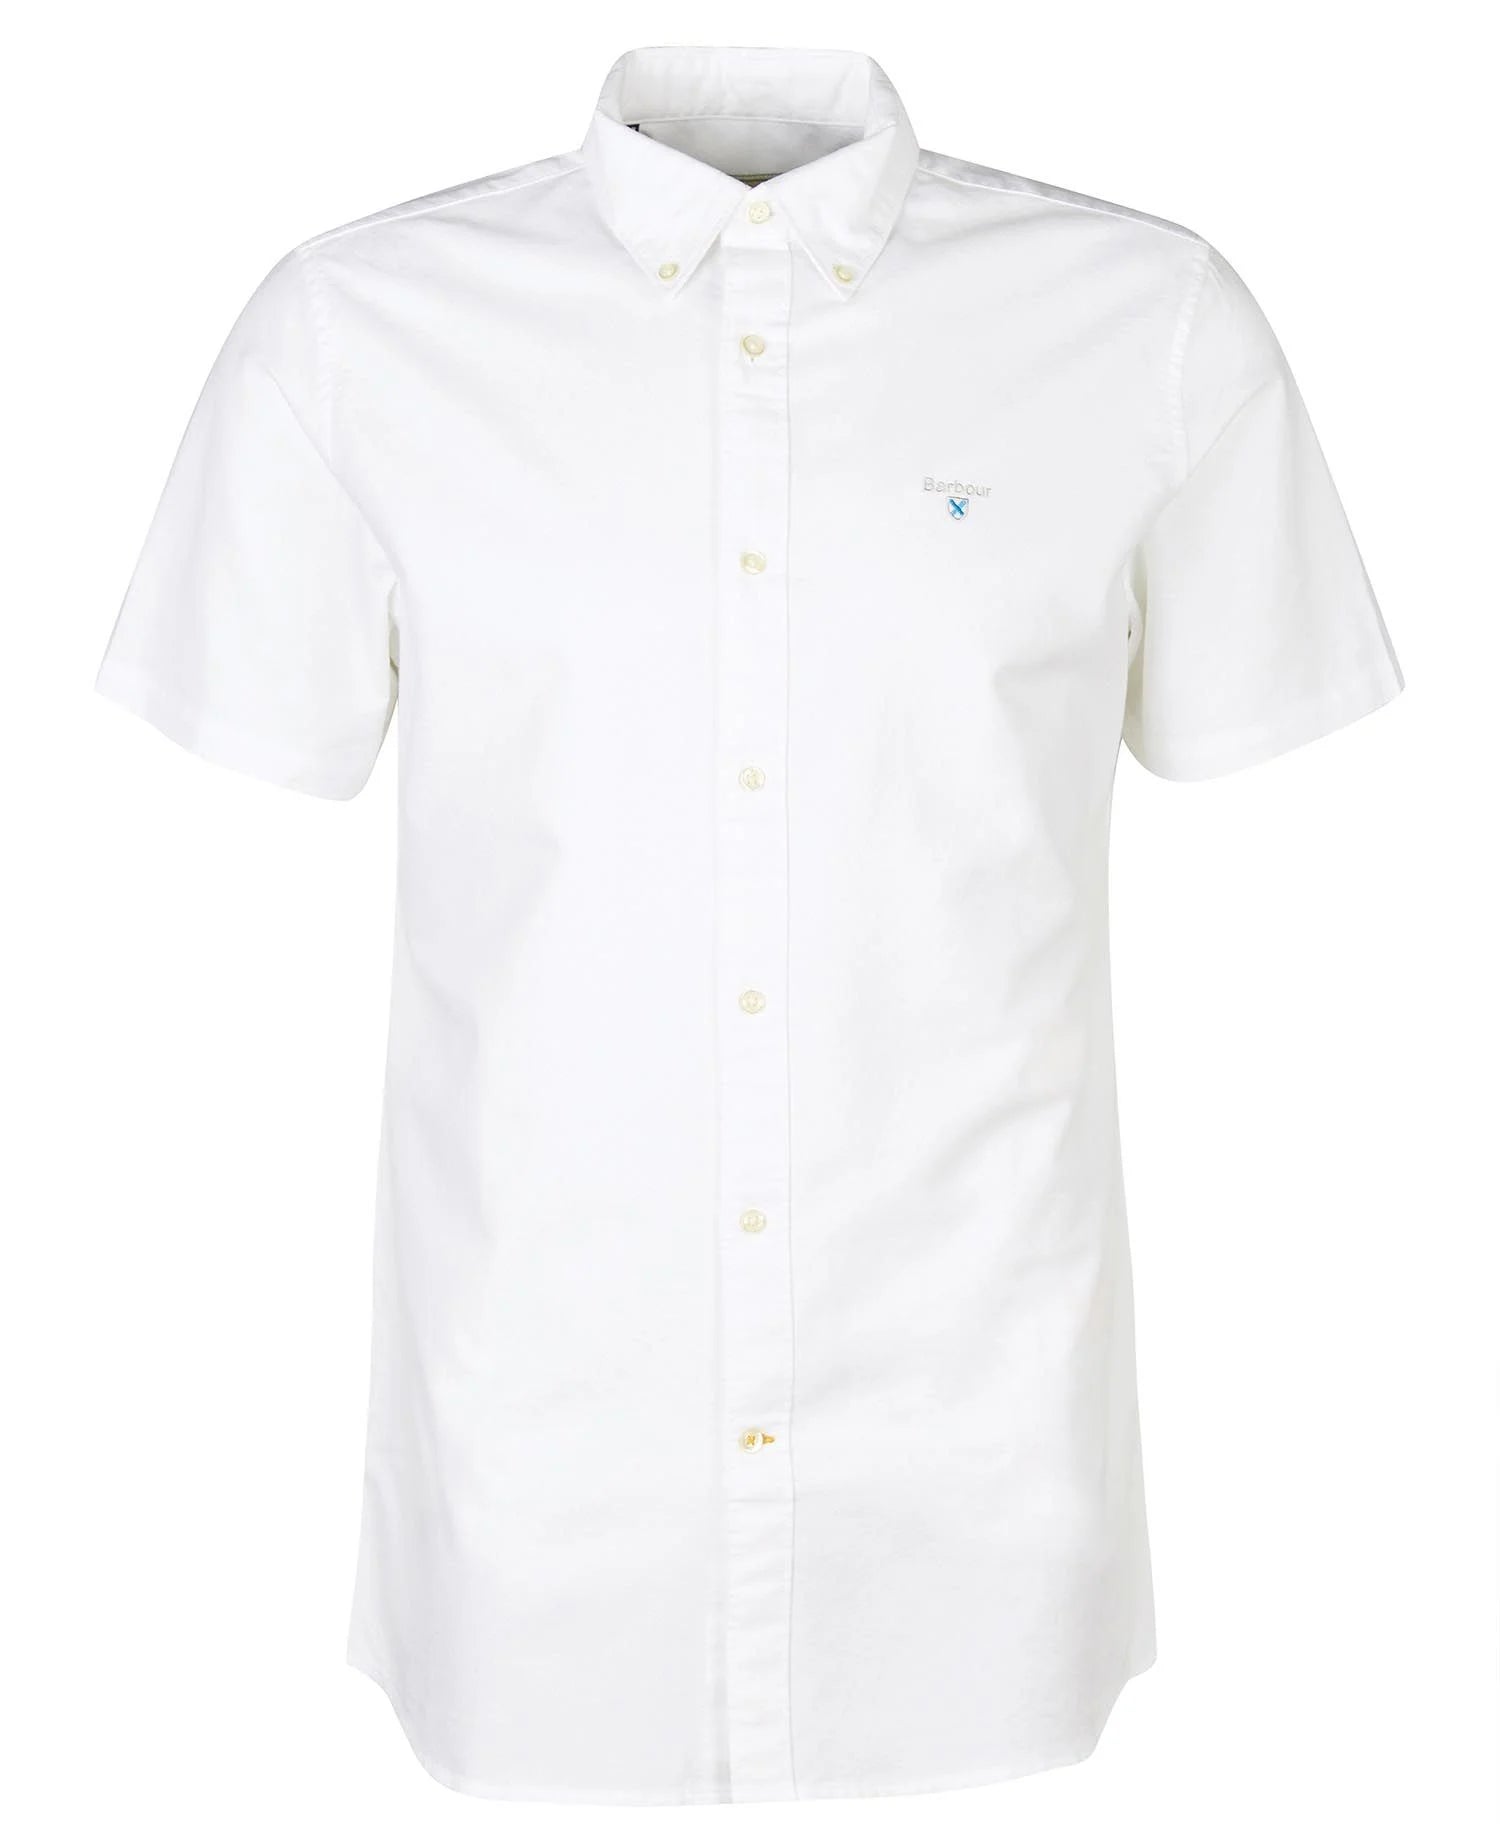 BARBOUR Oxtown Short Sleeve Tailored Shirt - Mens - White